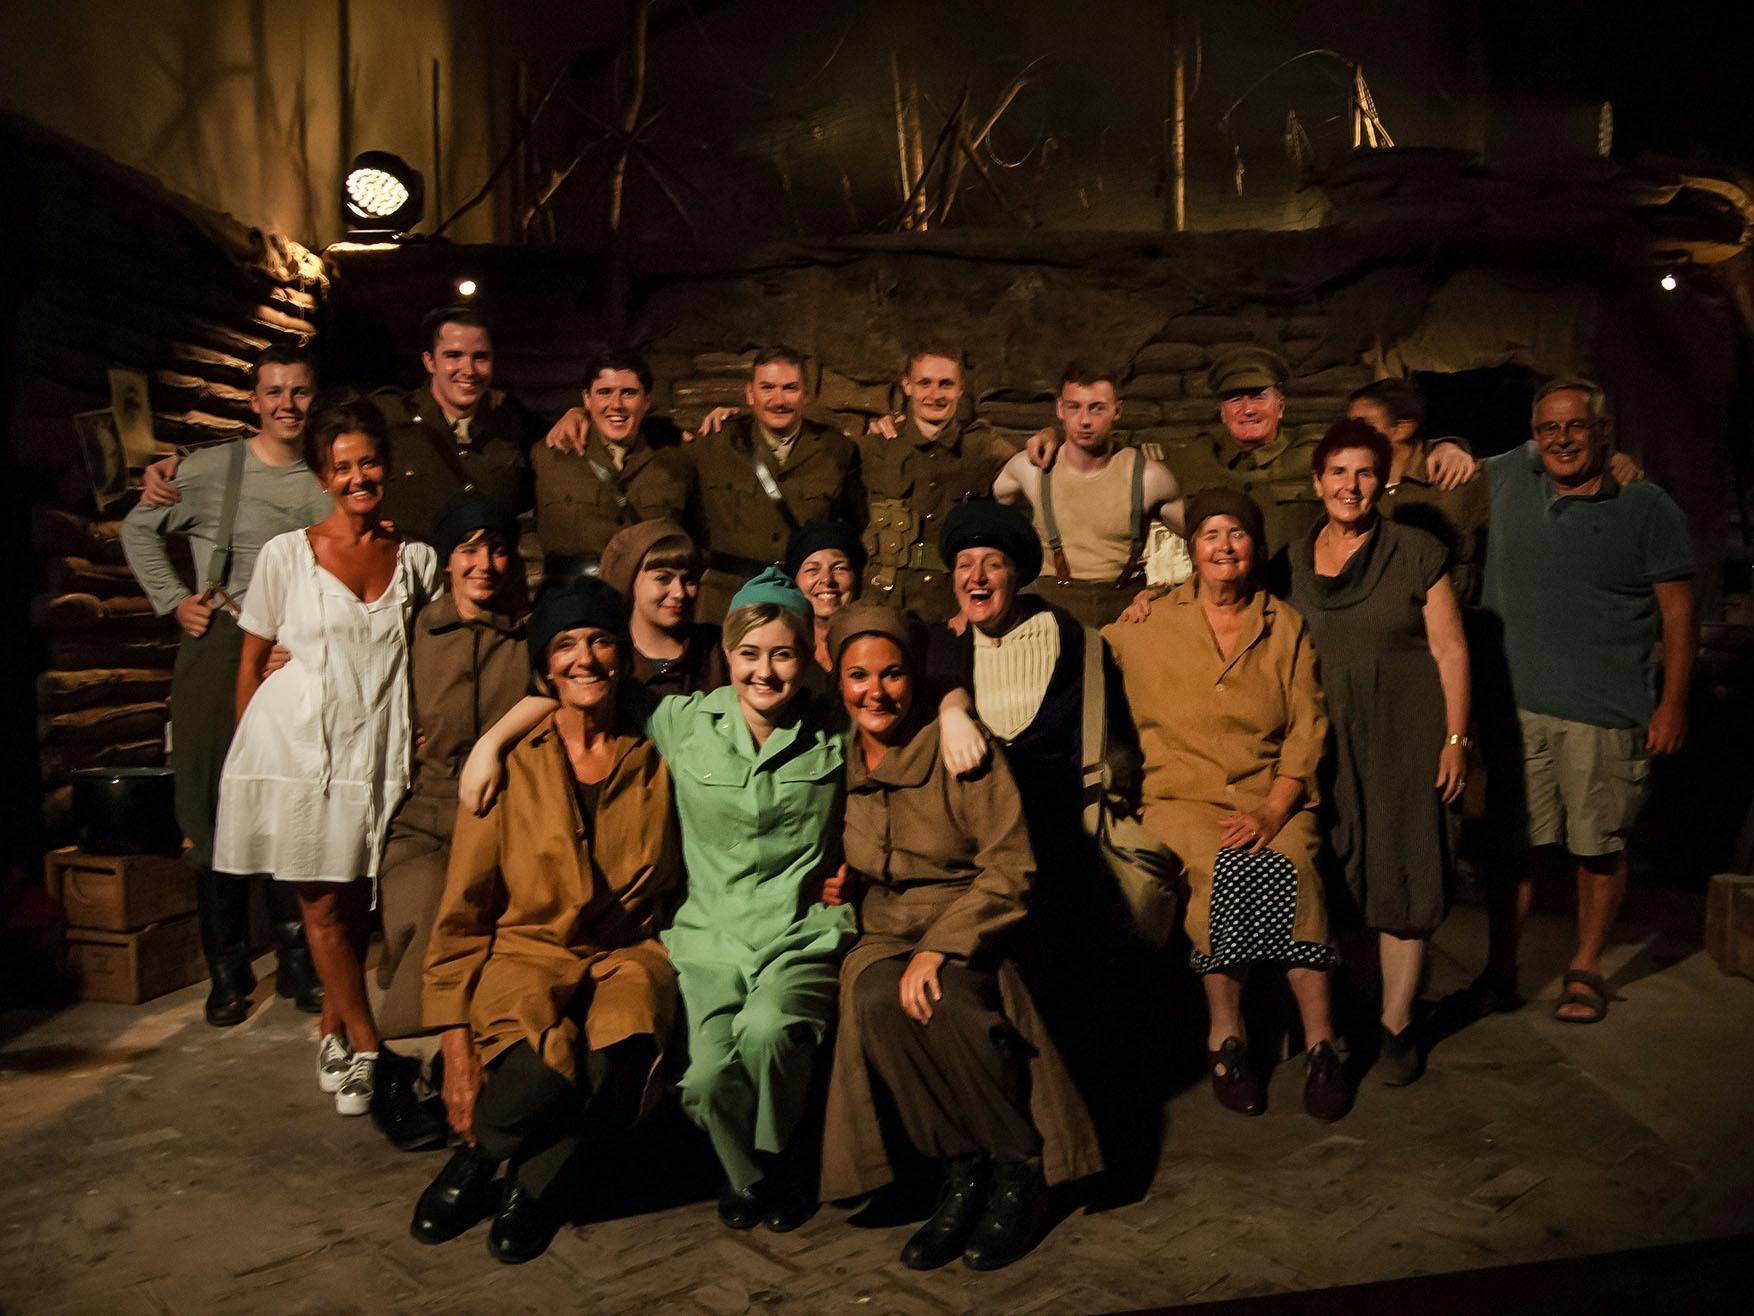 Photograph of the cast of Arts Dream Selsey's performance of 